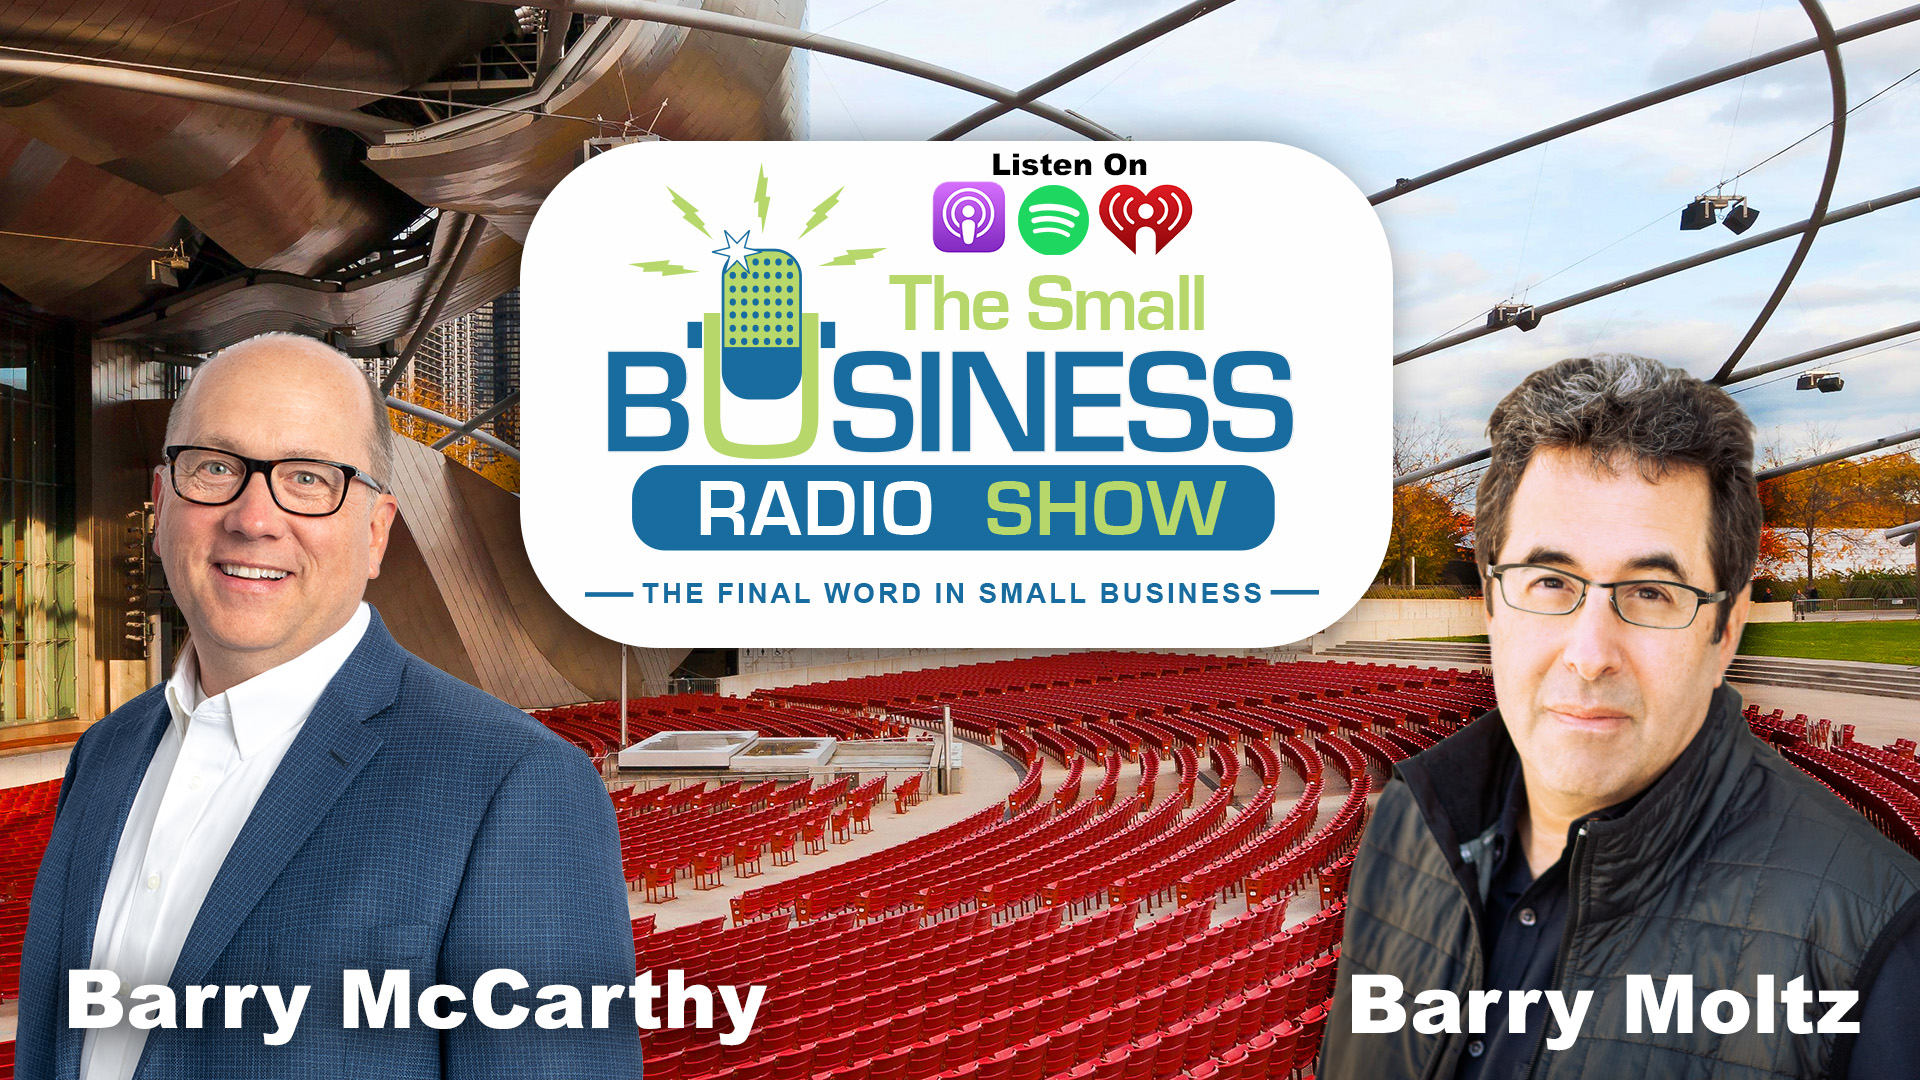 Barry McCarthy on The Small Business Radio Show